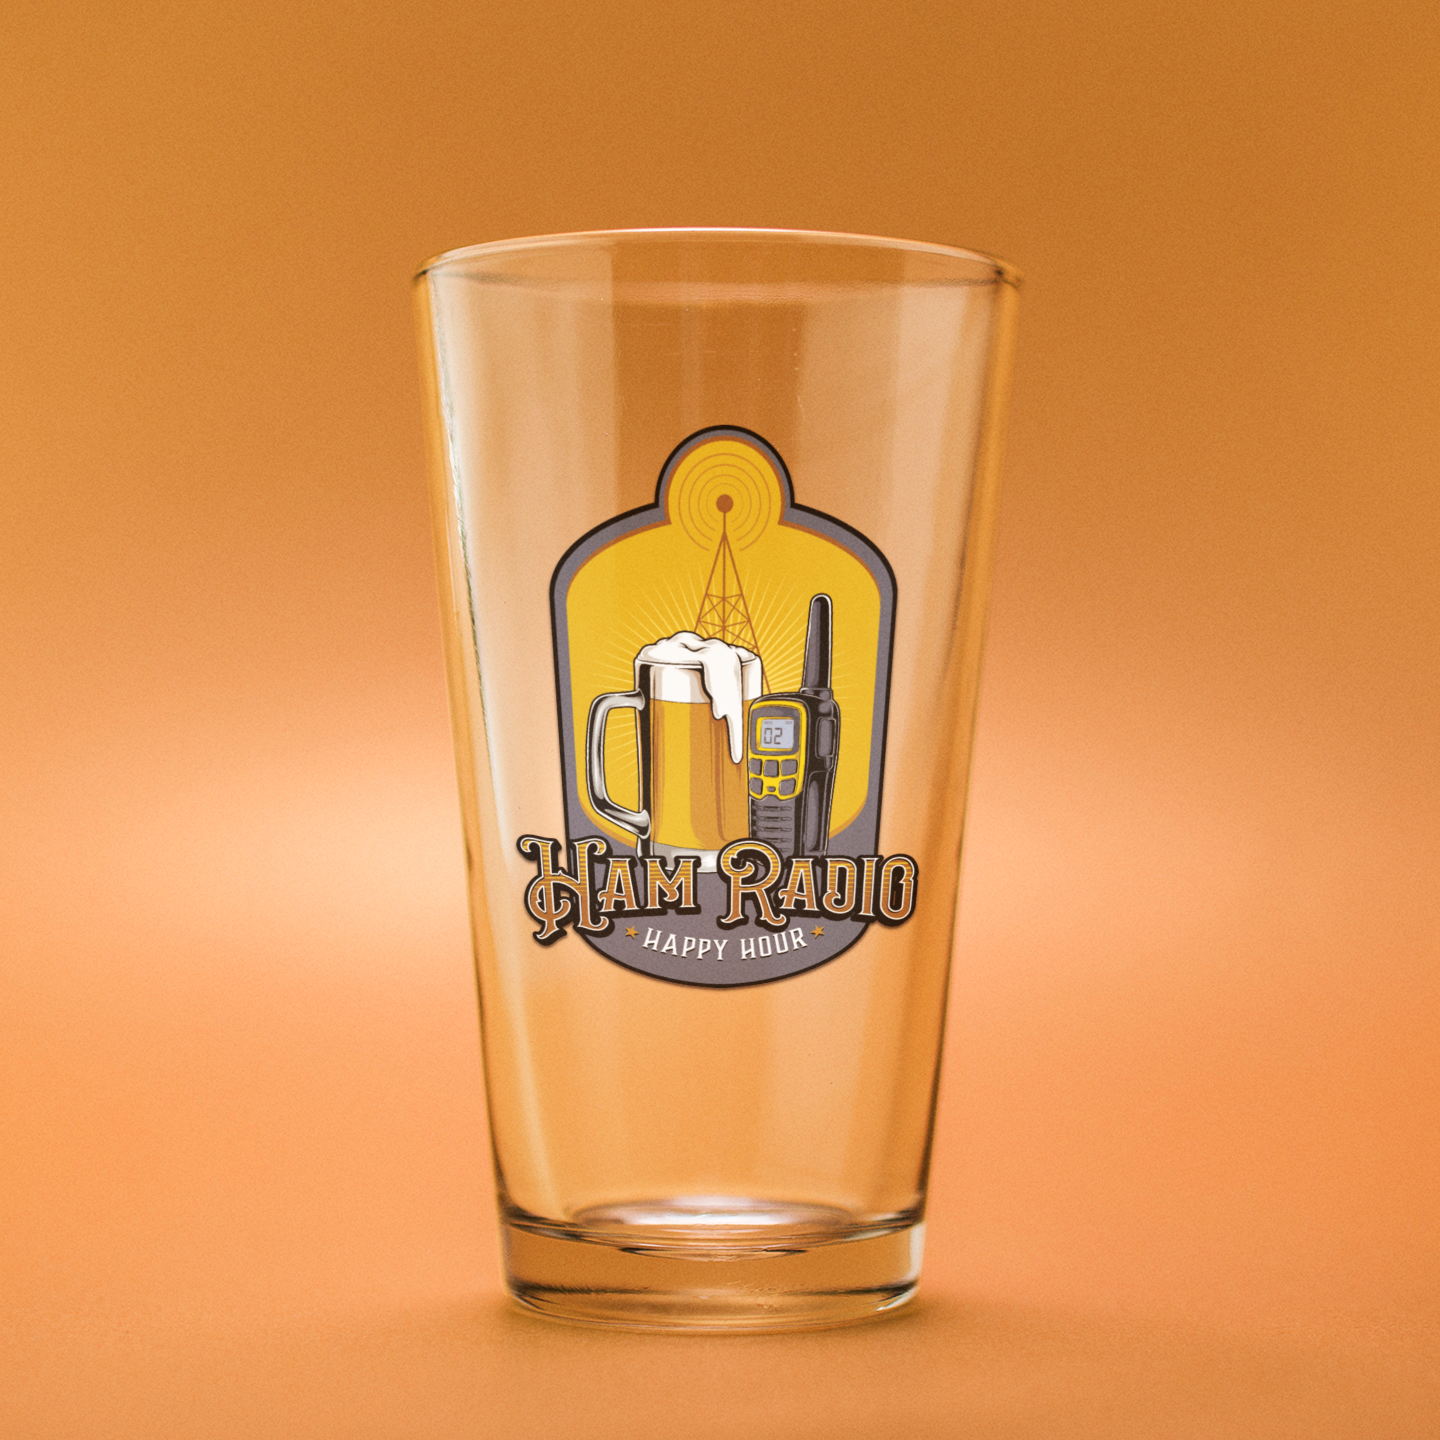 Brewing Co. Personalized 16oz. Printed Beer Can Glass